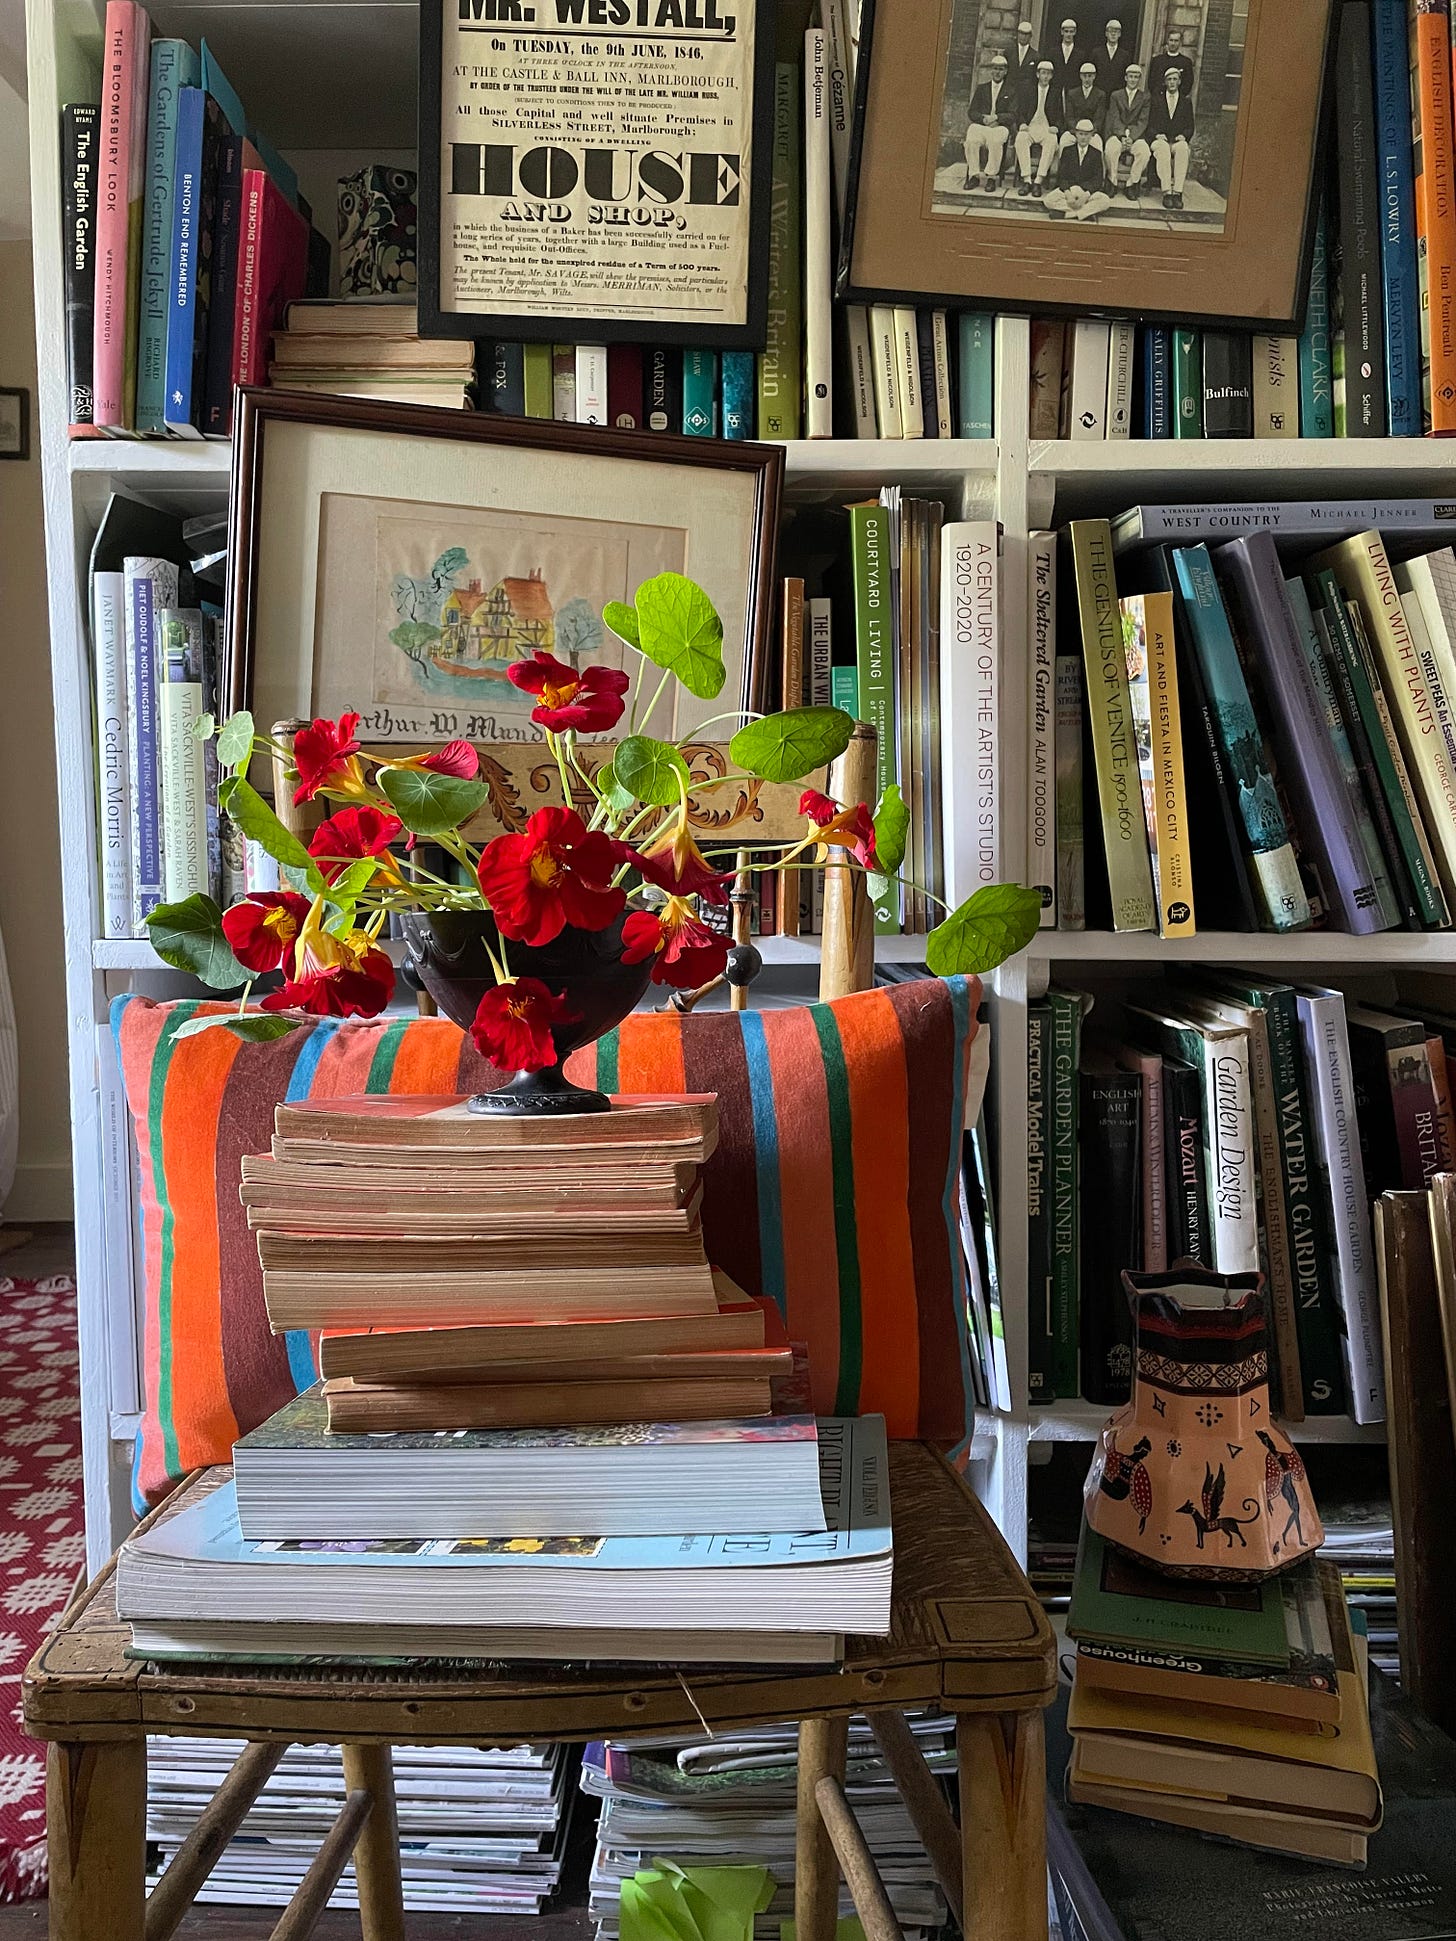 colourful flowers in front of a bookshelf